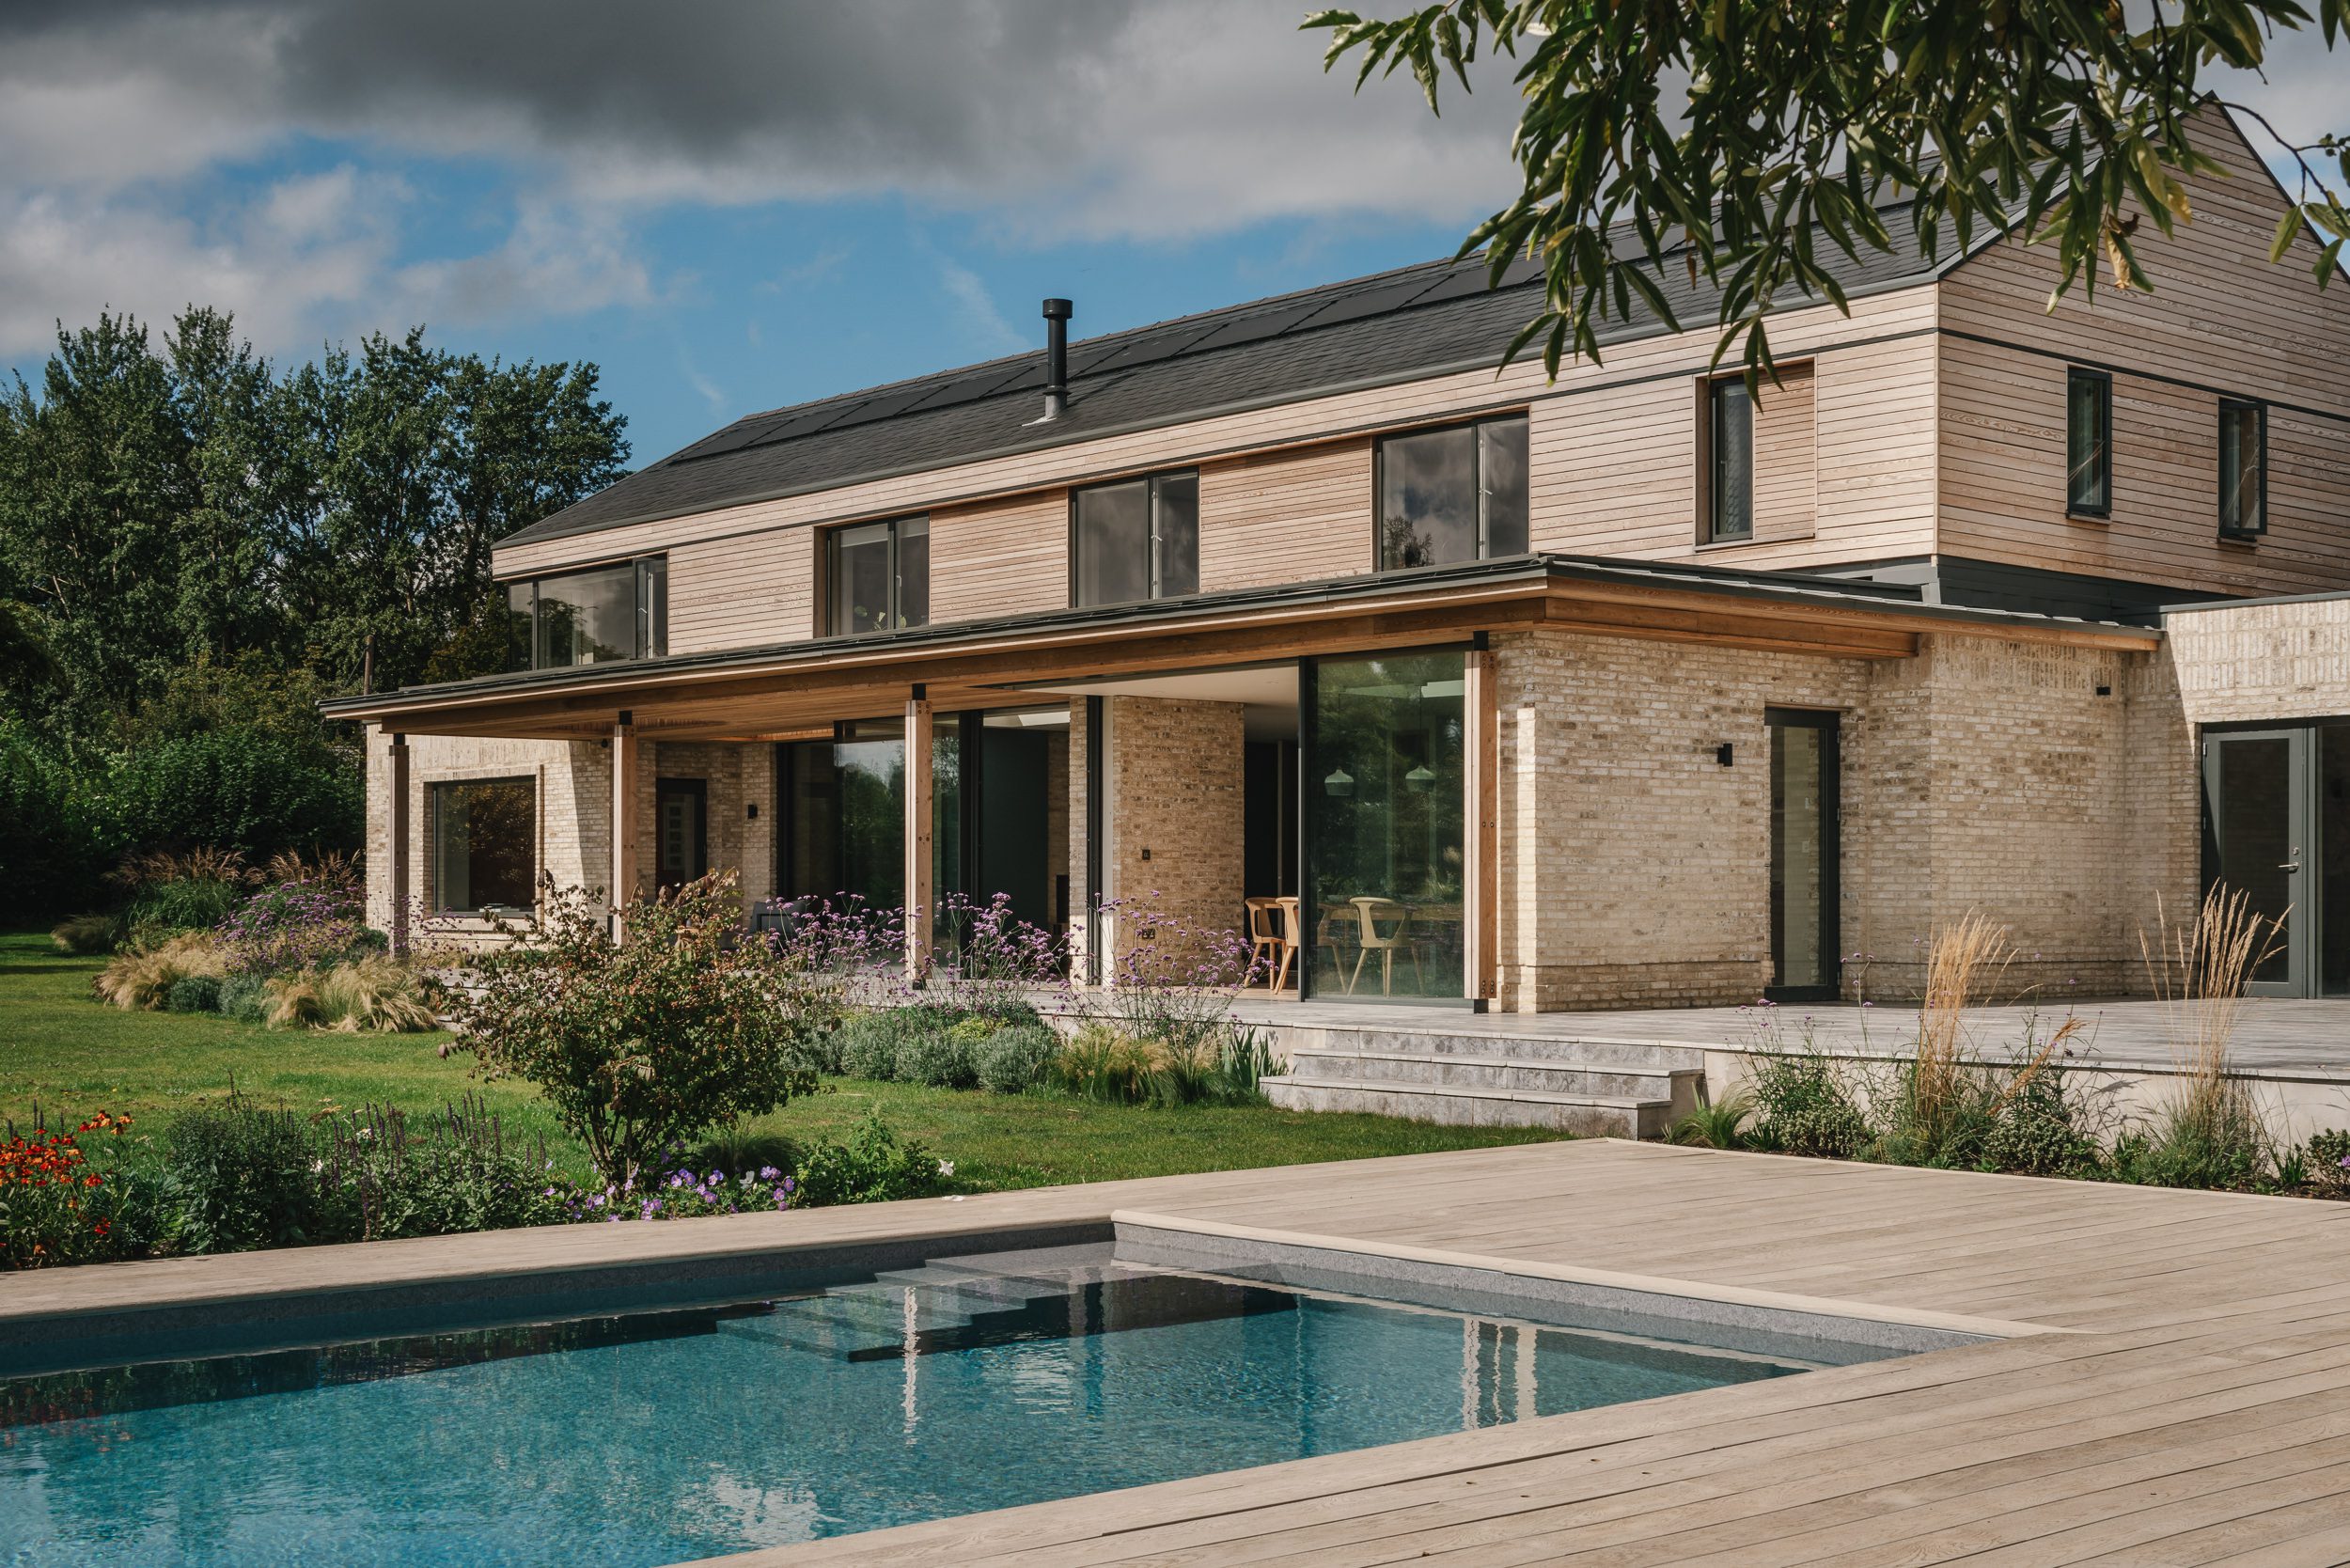 Side view of a house captured from the other side of a swimming pool within the house, with green lush grass in front, photographed by Brett Charles, showcasing architectural photography in the UK.